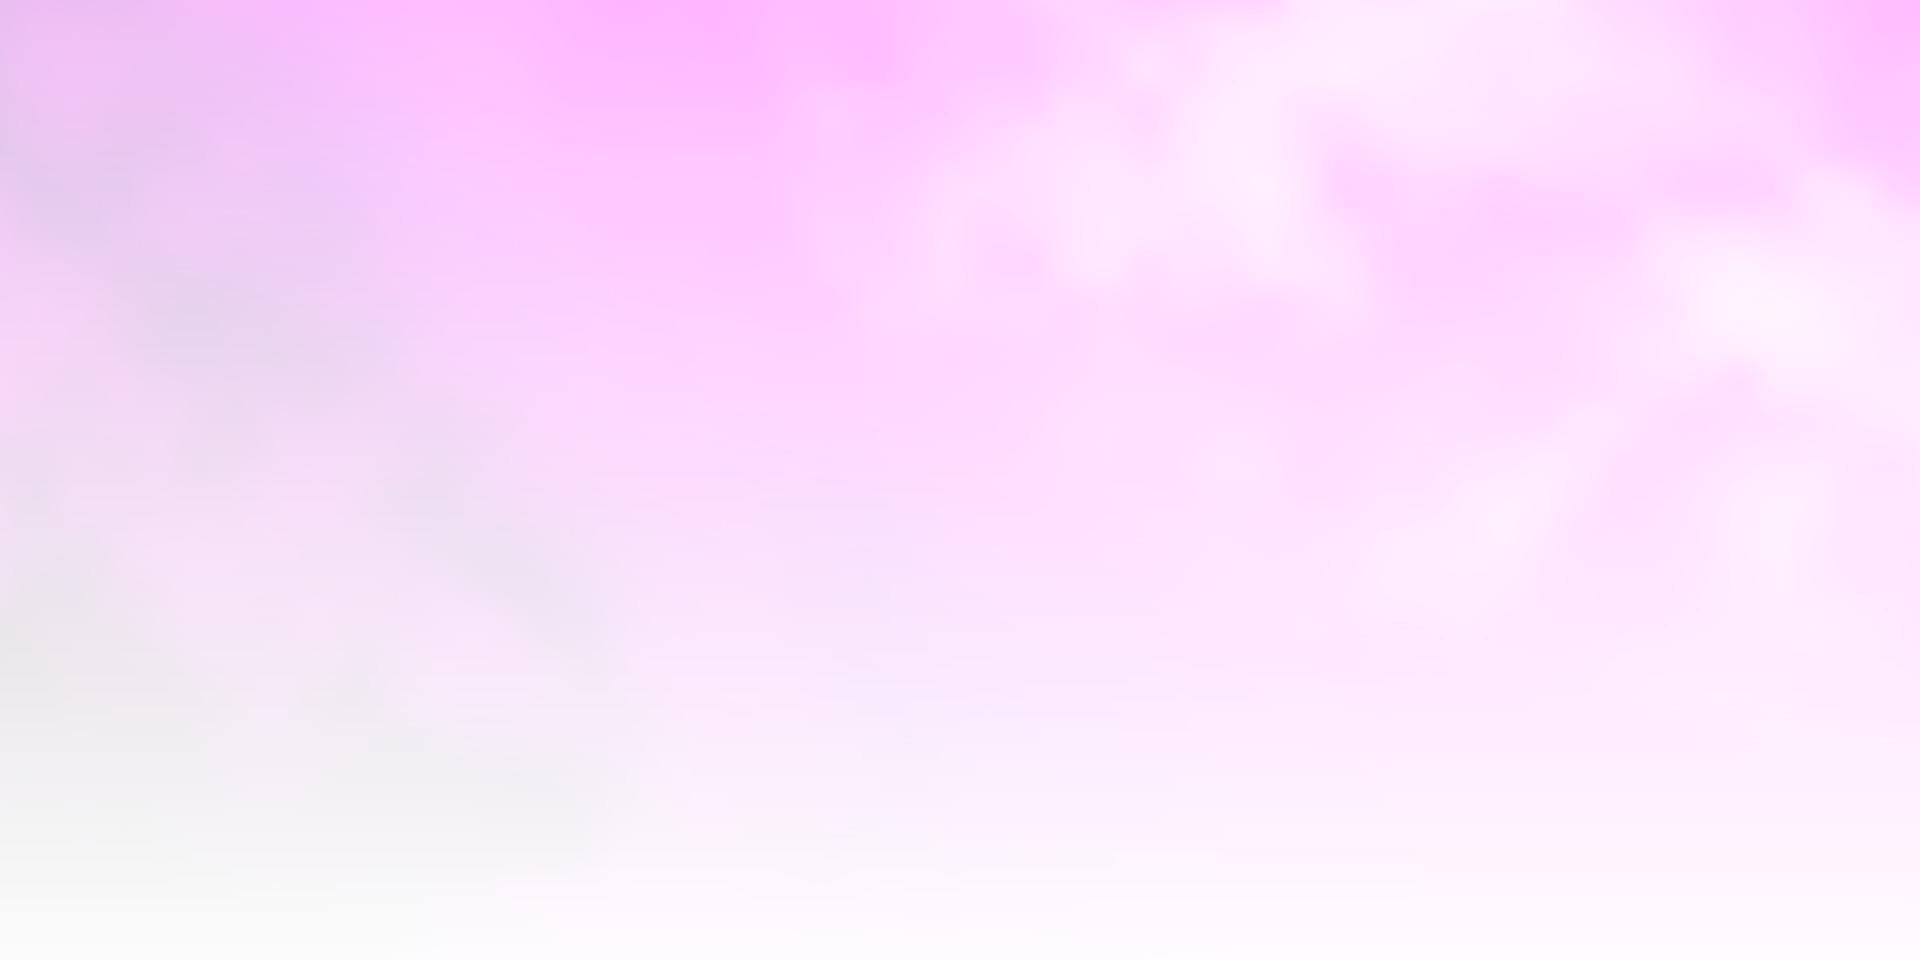 Light Pink vector background with clouds.